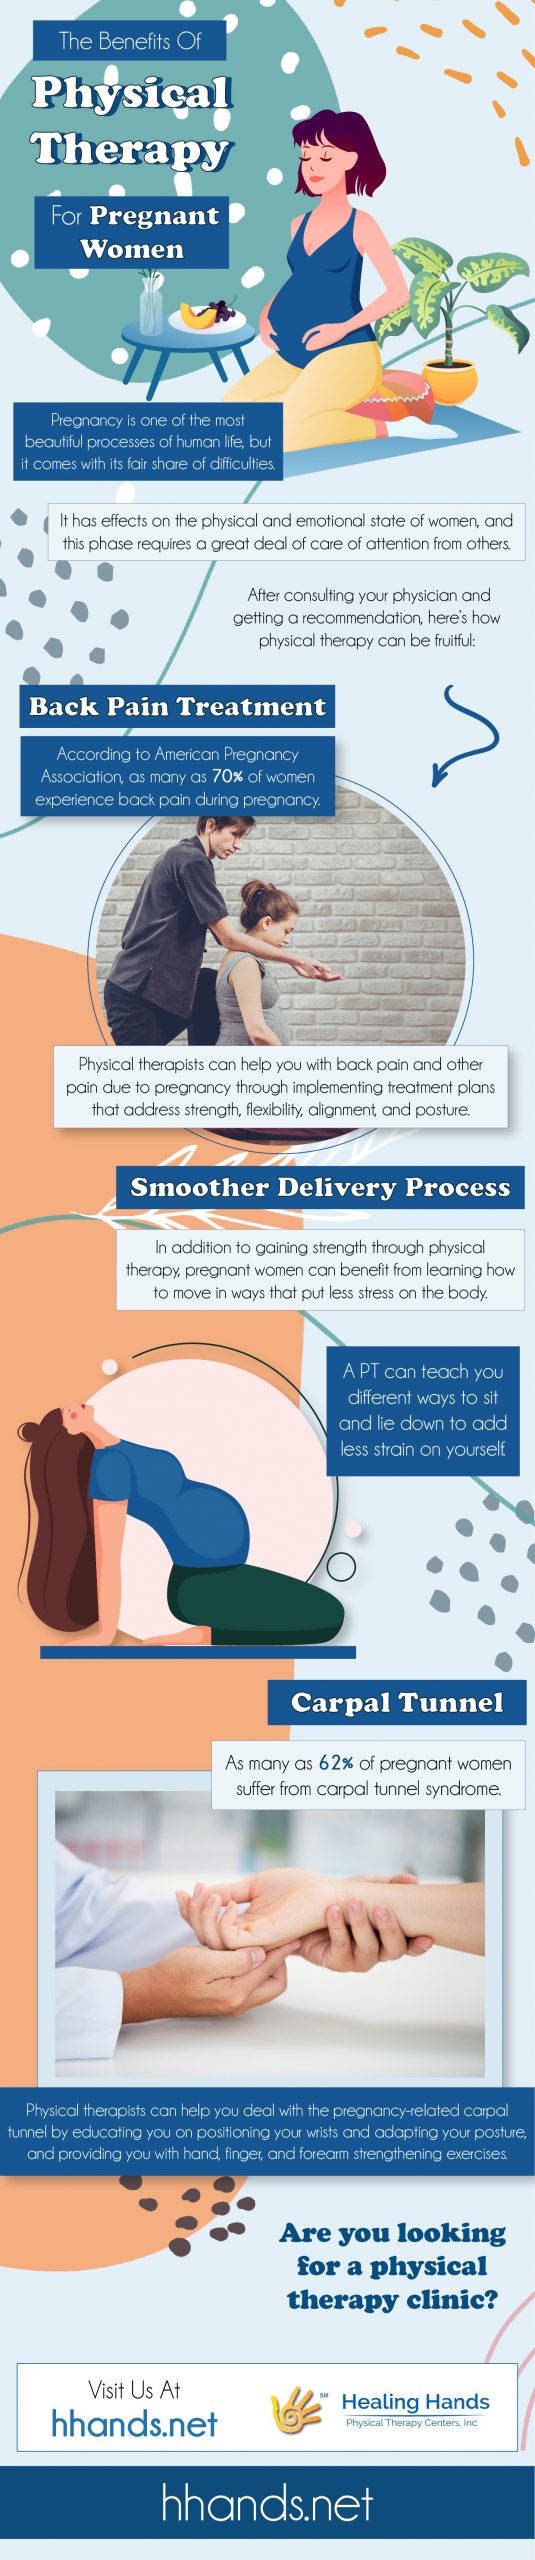 benefits of PT for pregnant women